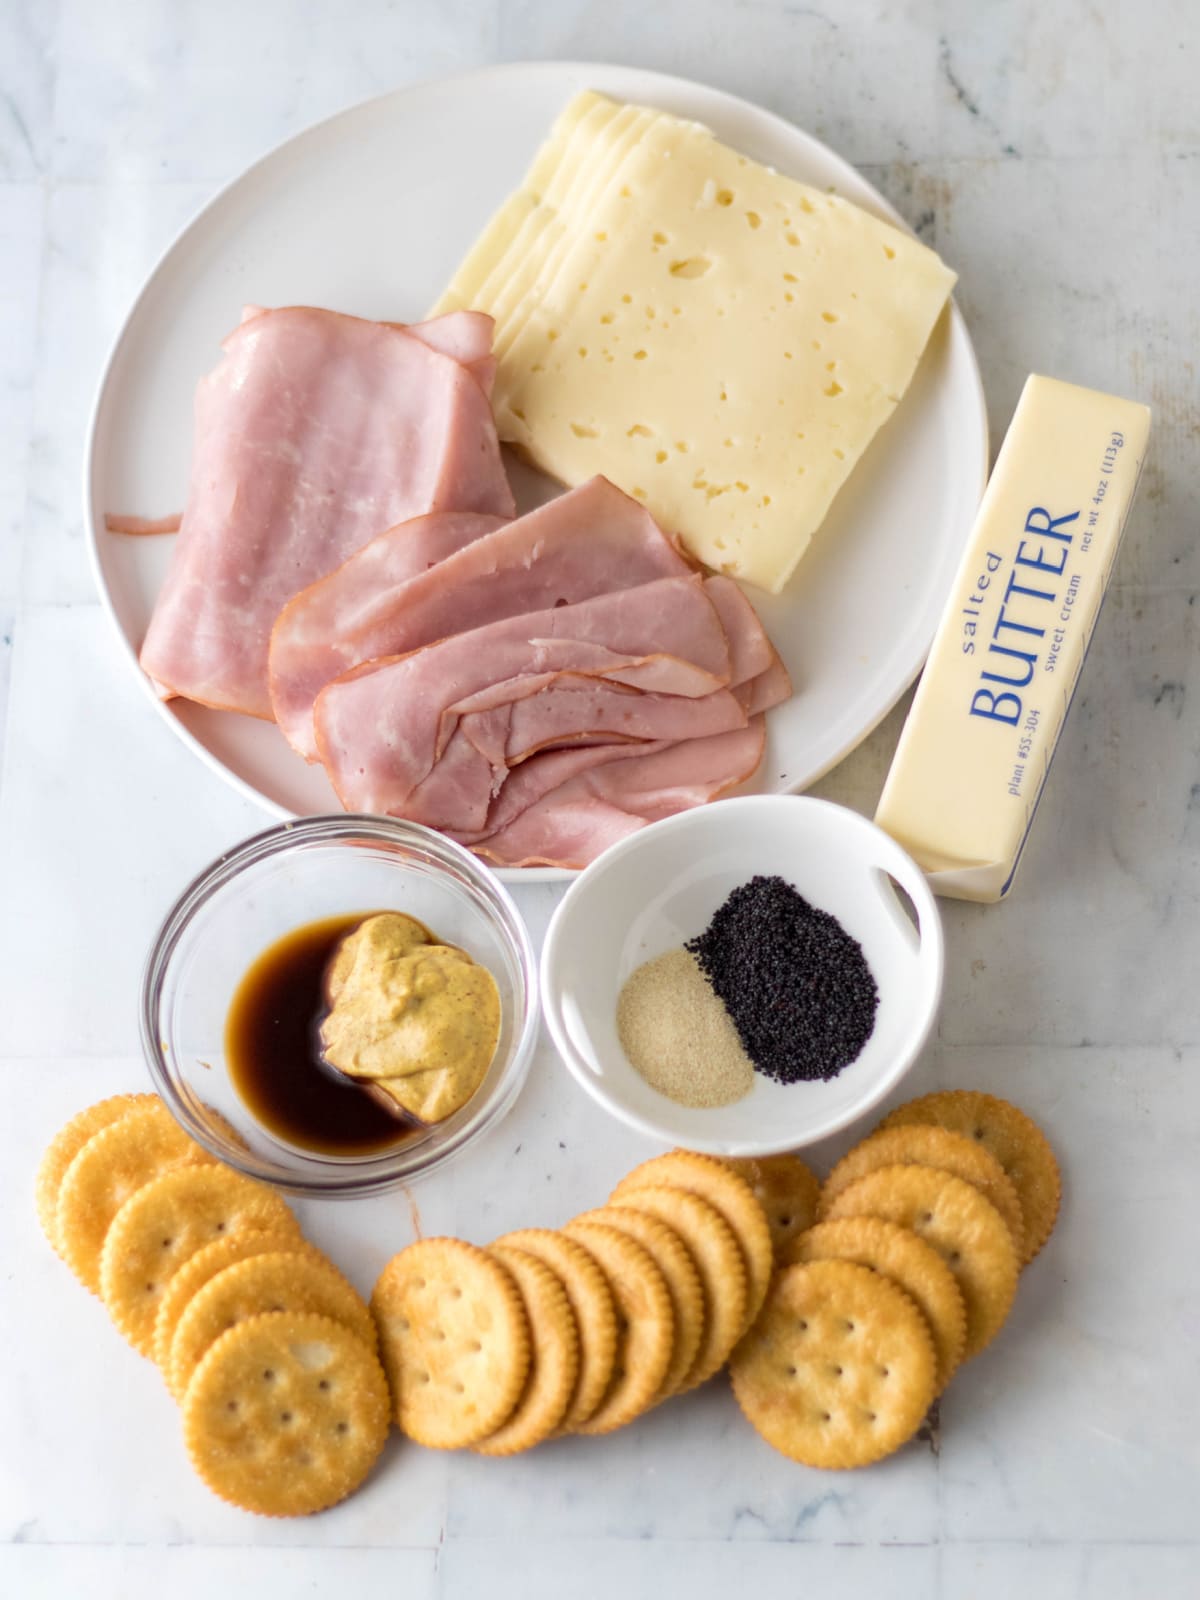 ham, cheese, crackers and glaze ingredients